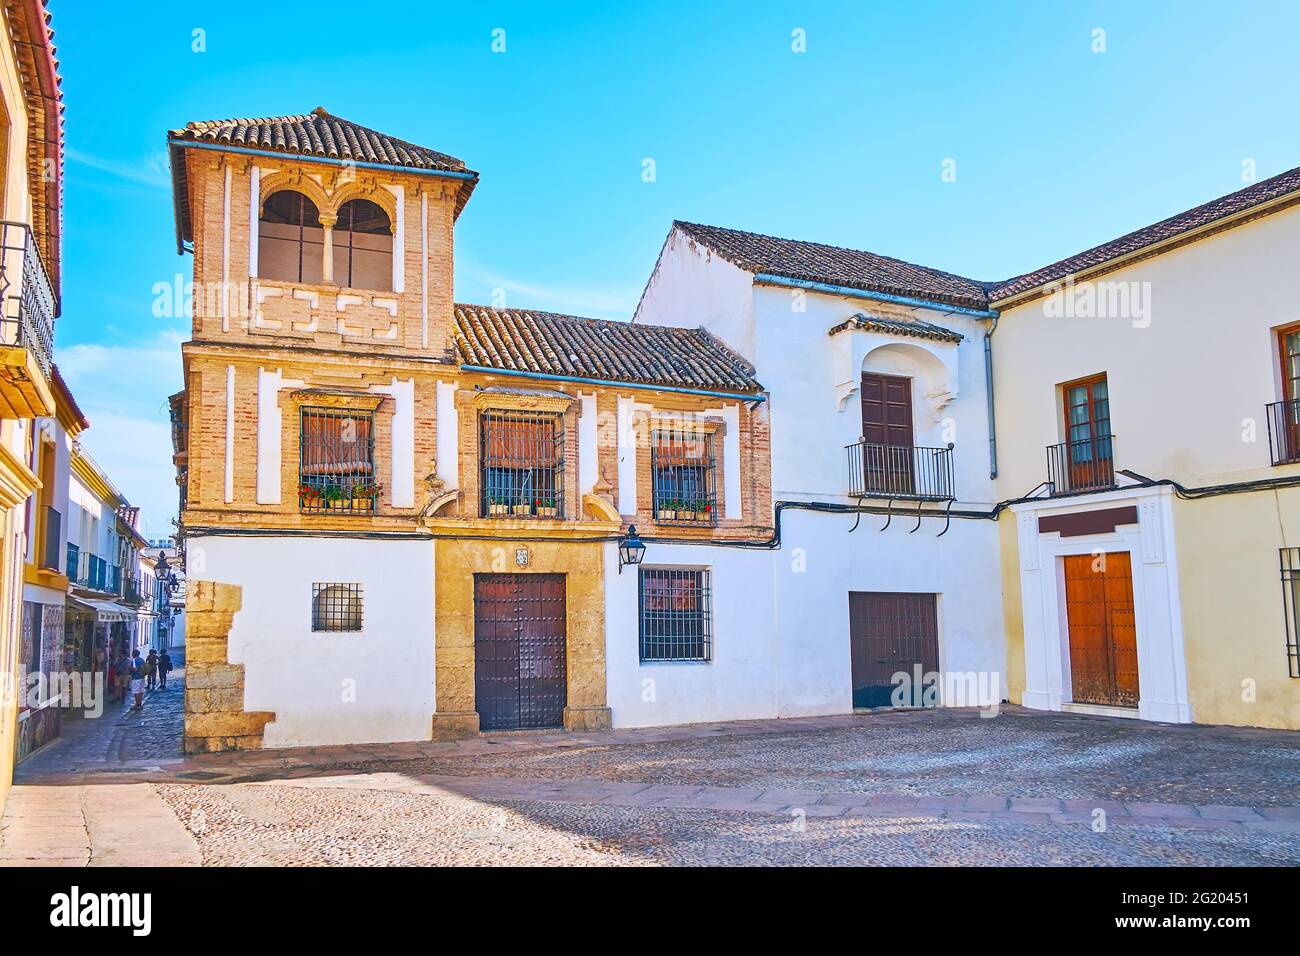 Historic Maimonides Square with preserved medieval mansions, located in Jewish Quarter - Juderia, Cordoba, Spain Stock Photo